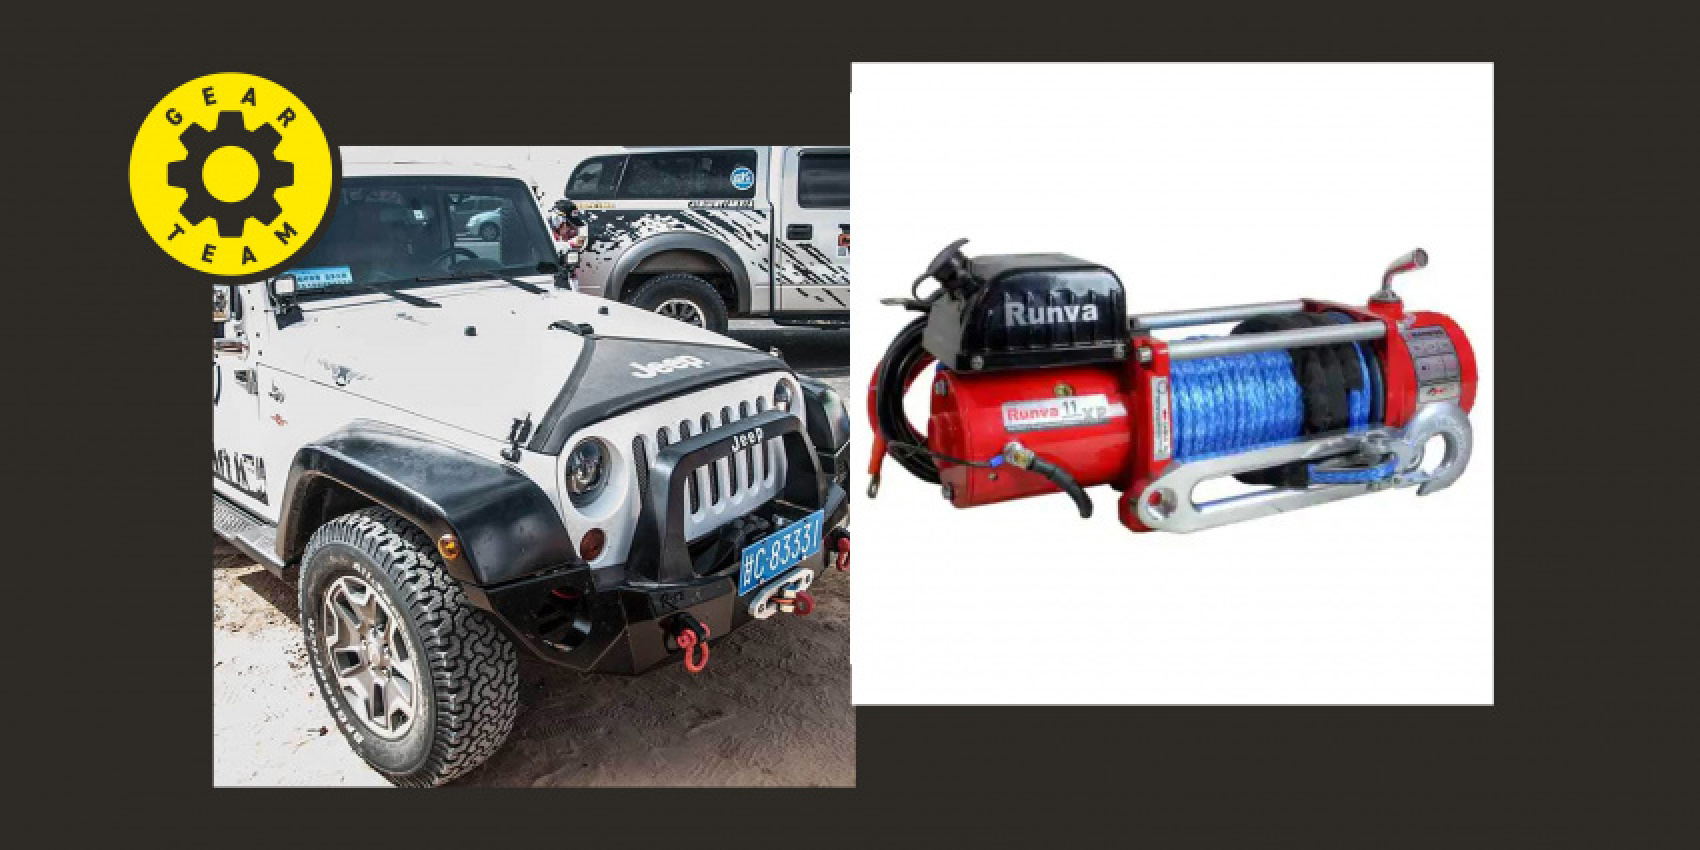 autos, cars, gear, electric winch, hydraulic winch, winch, winch deal, winch sale, deal alert: massive winch sale going on this week only at home depot